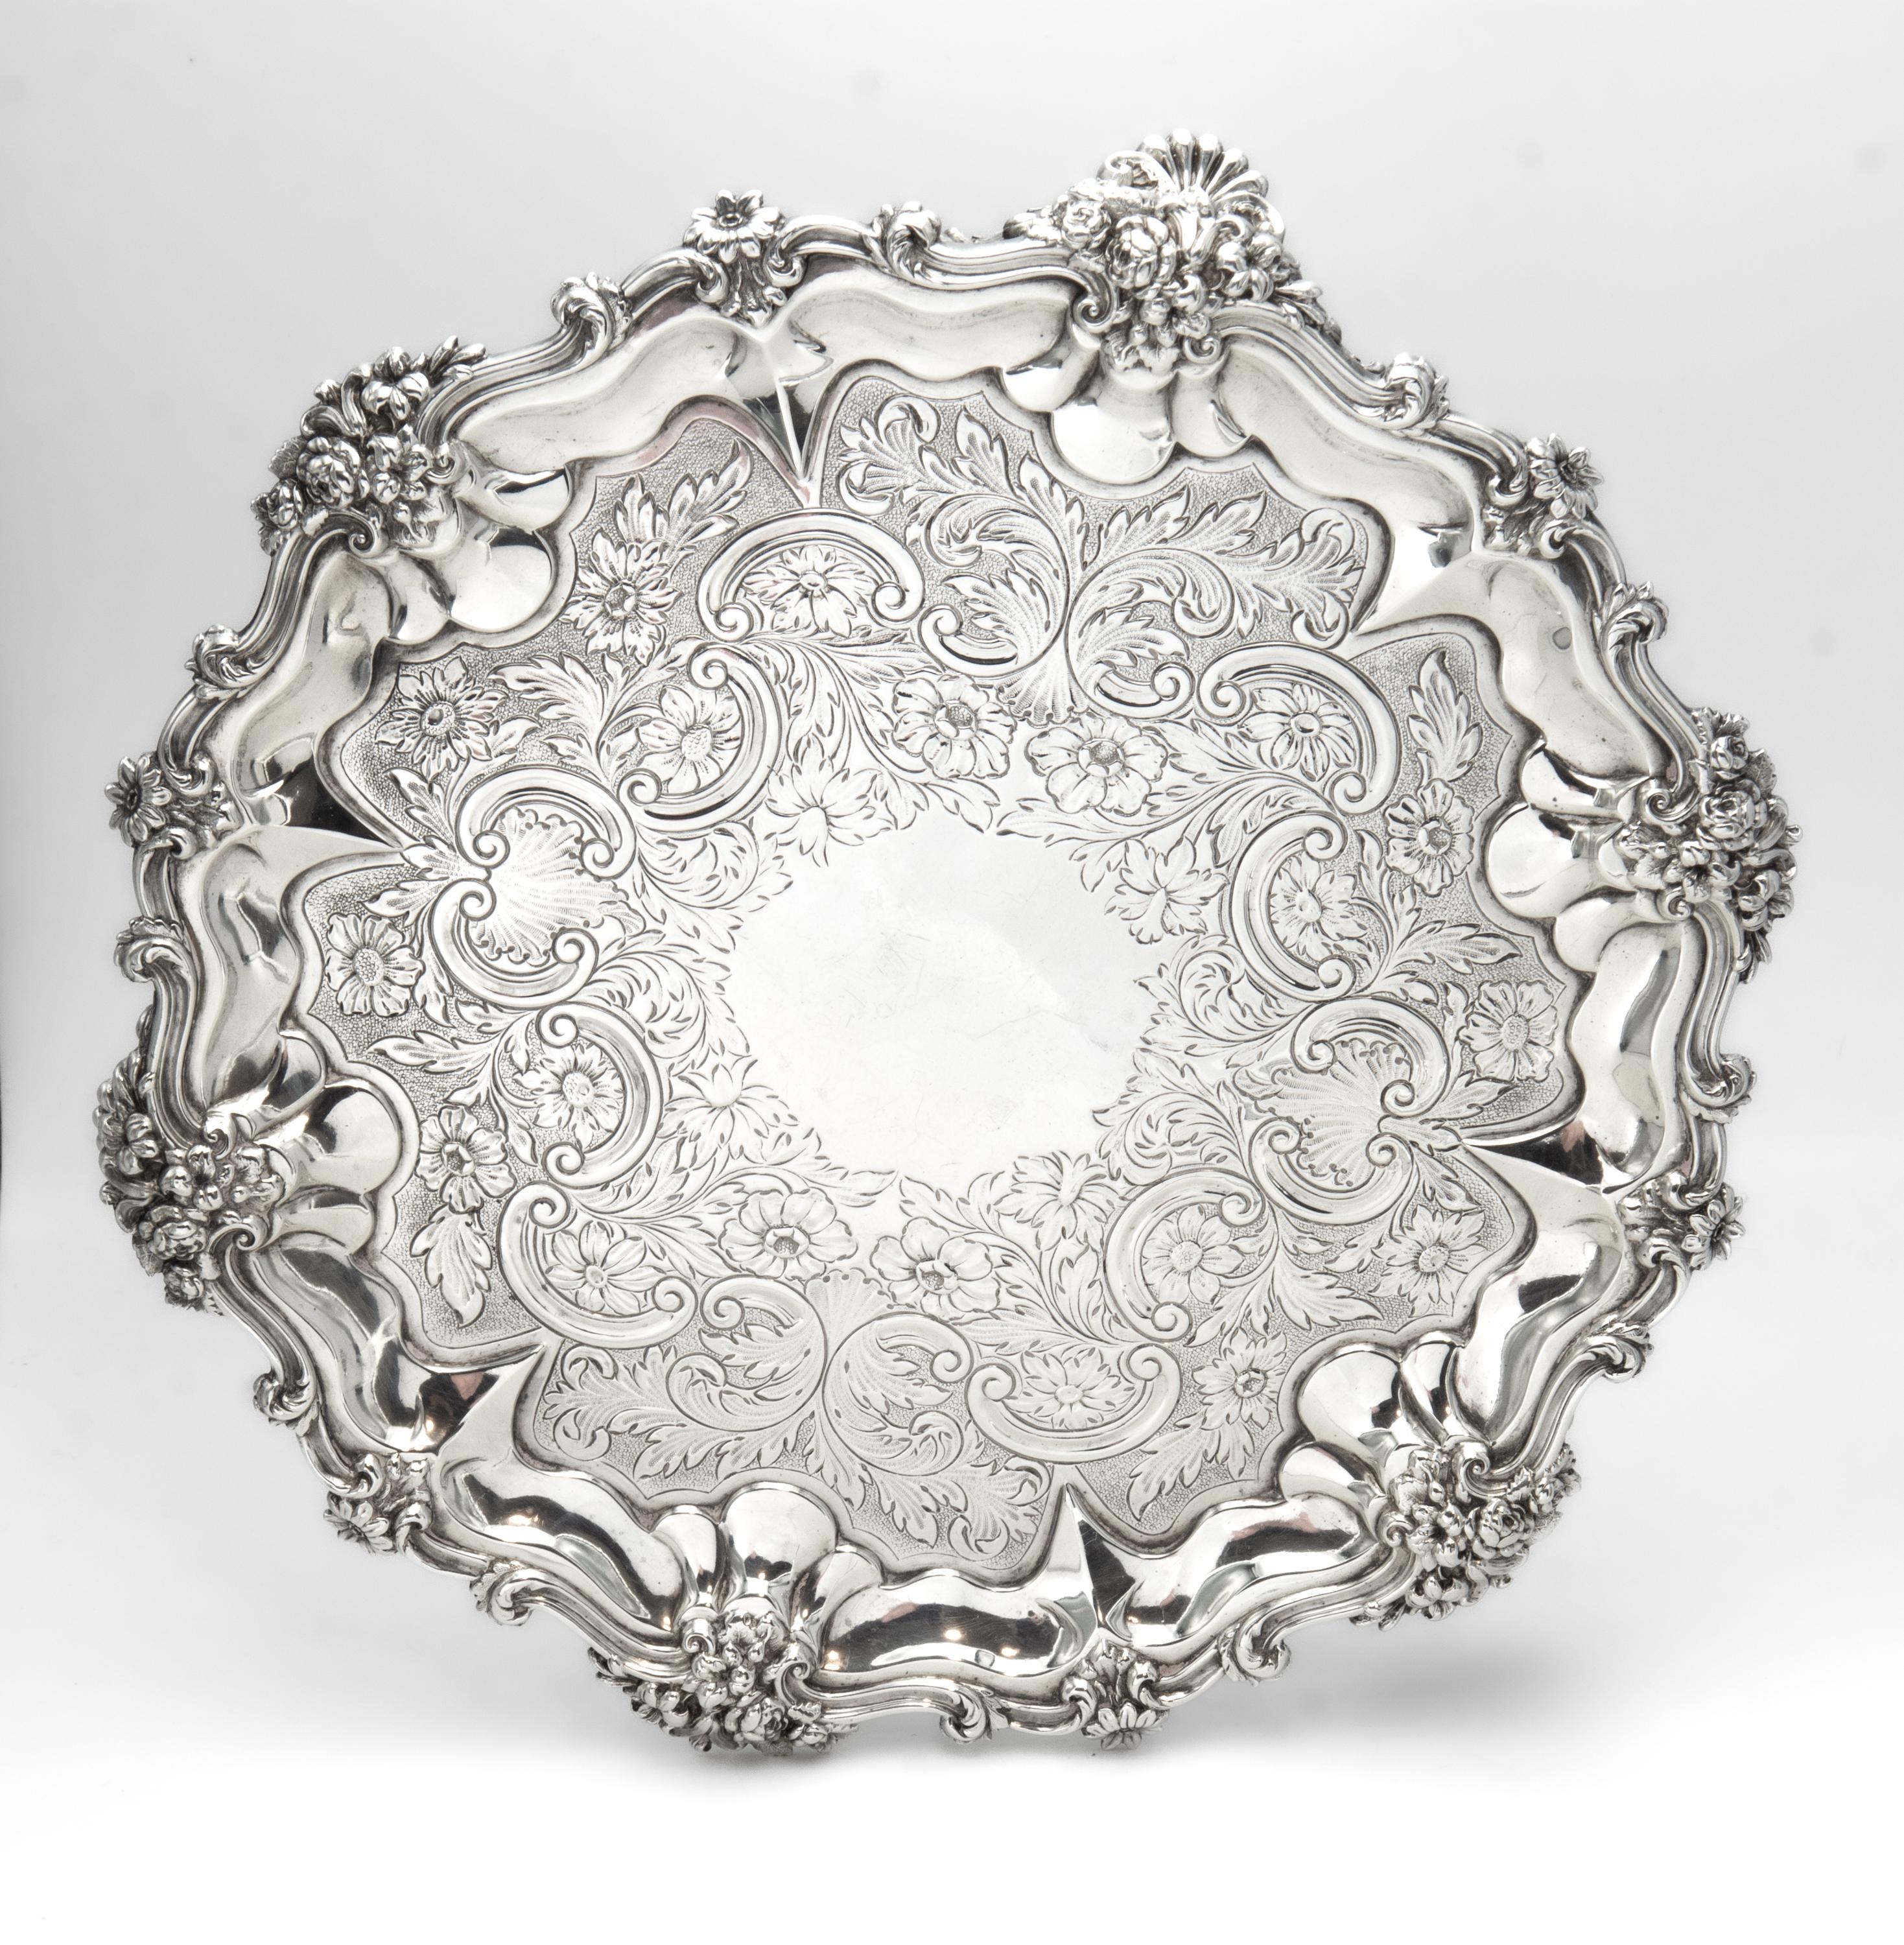 Antique William IV Sterling Silver Flat-Chased Waiter Tray London 1831 For Sale 5